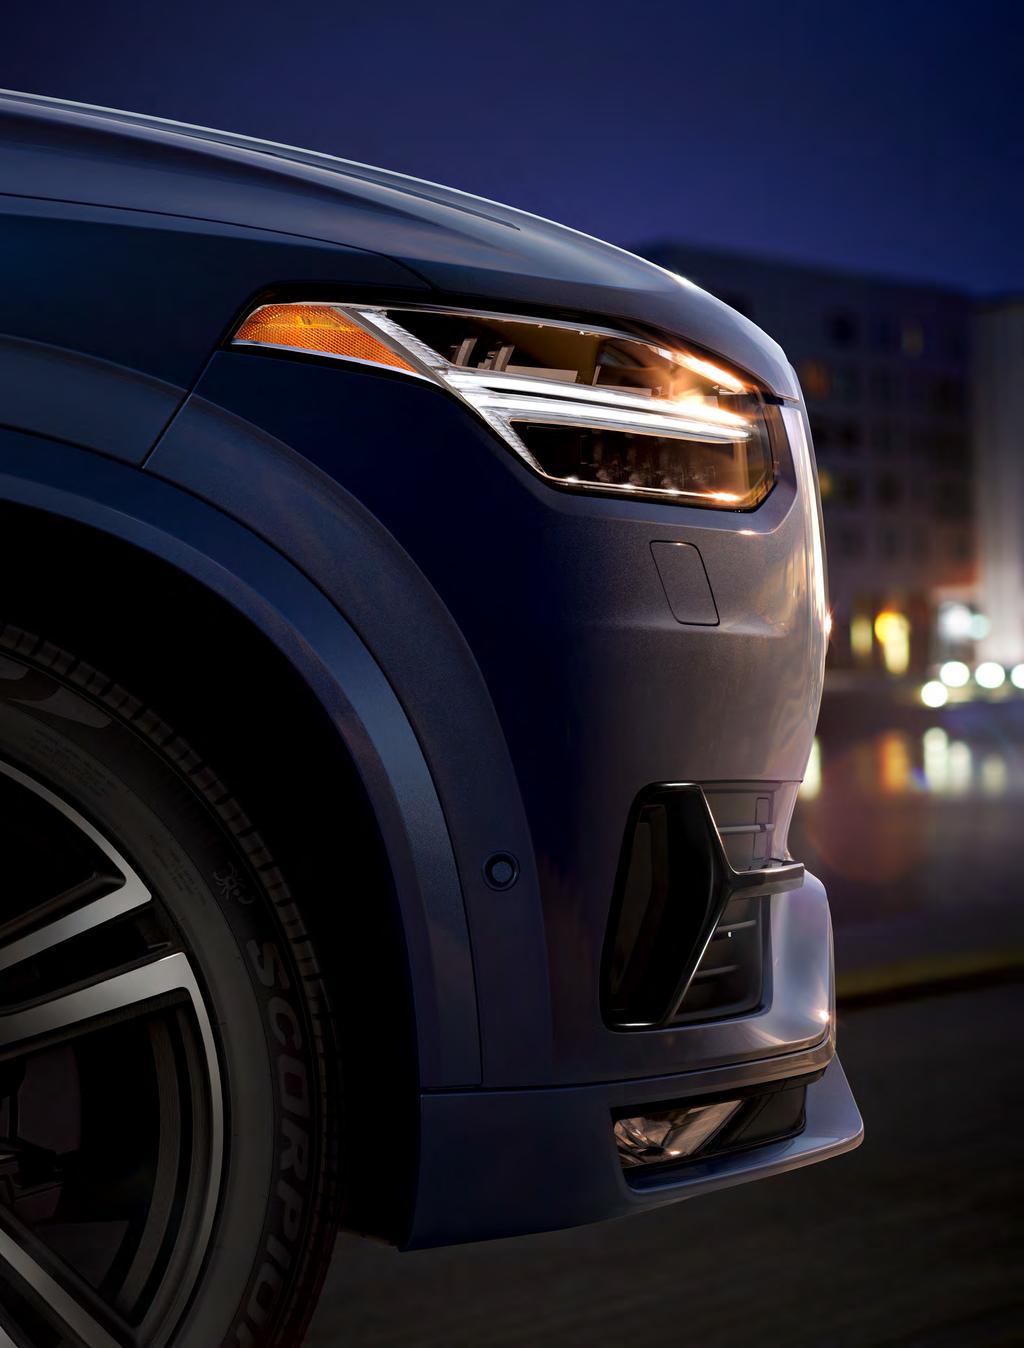 Light up the dark. Driving in the dark just became a lot more enjoyable and safe. Our signature design LED headlights combine an impactful look with safety and convenience.